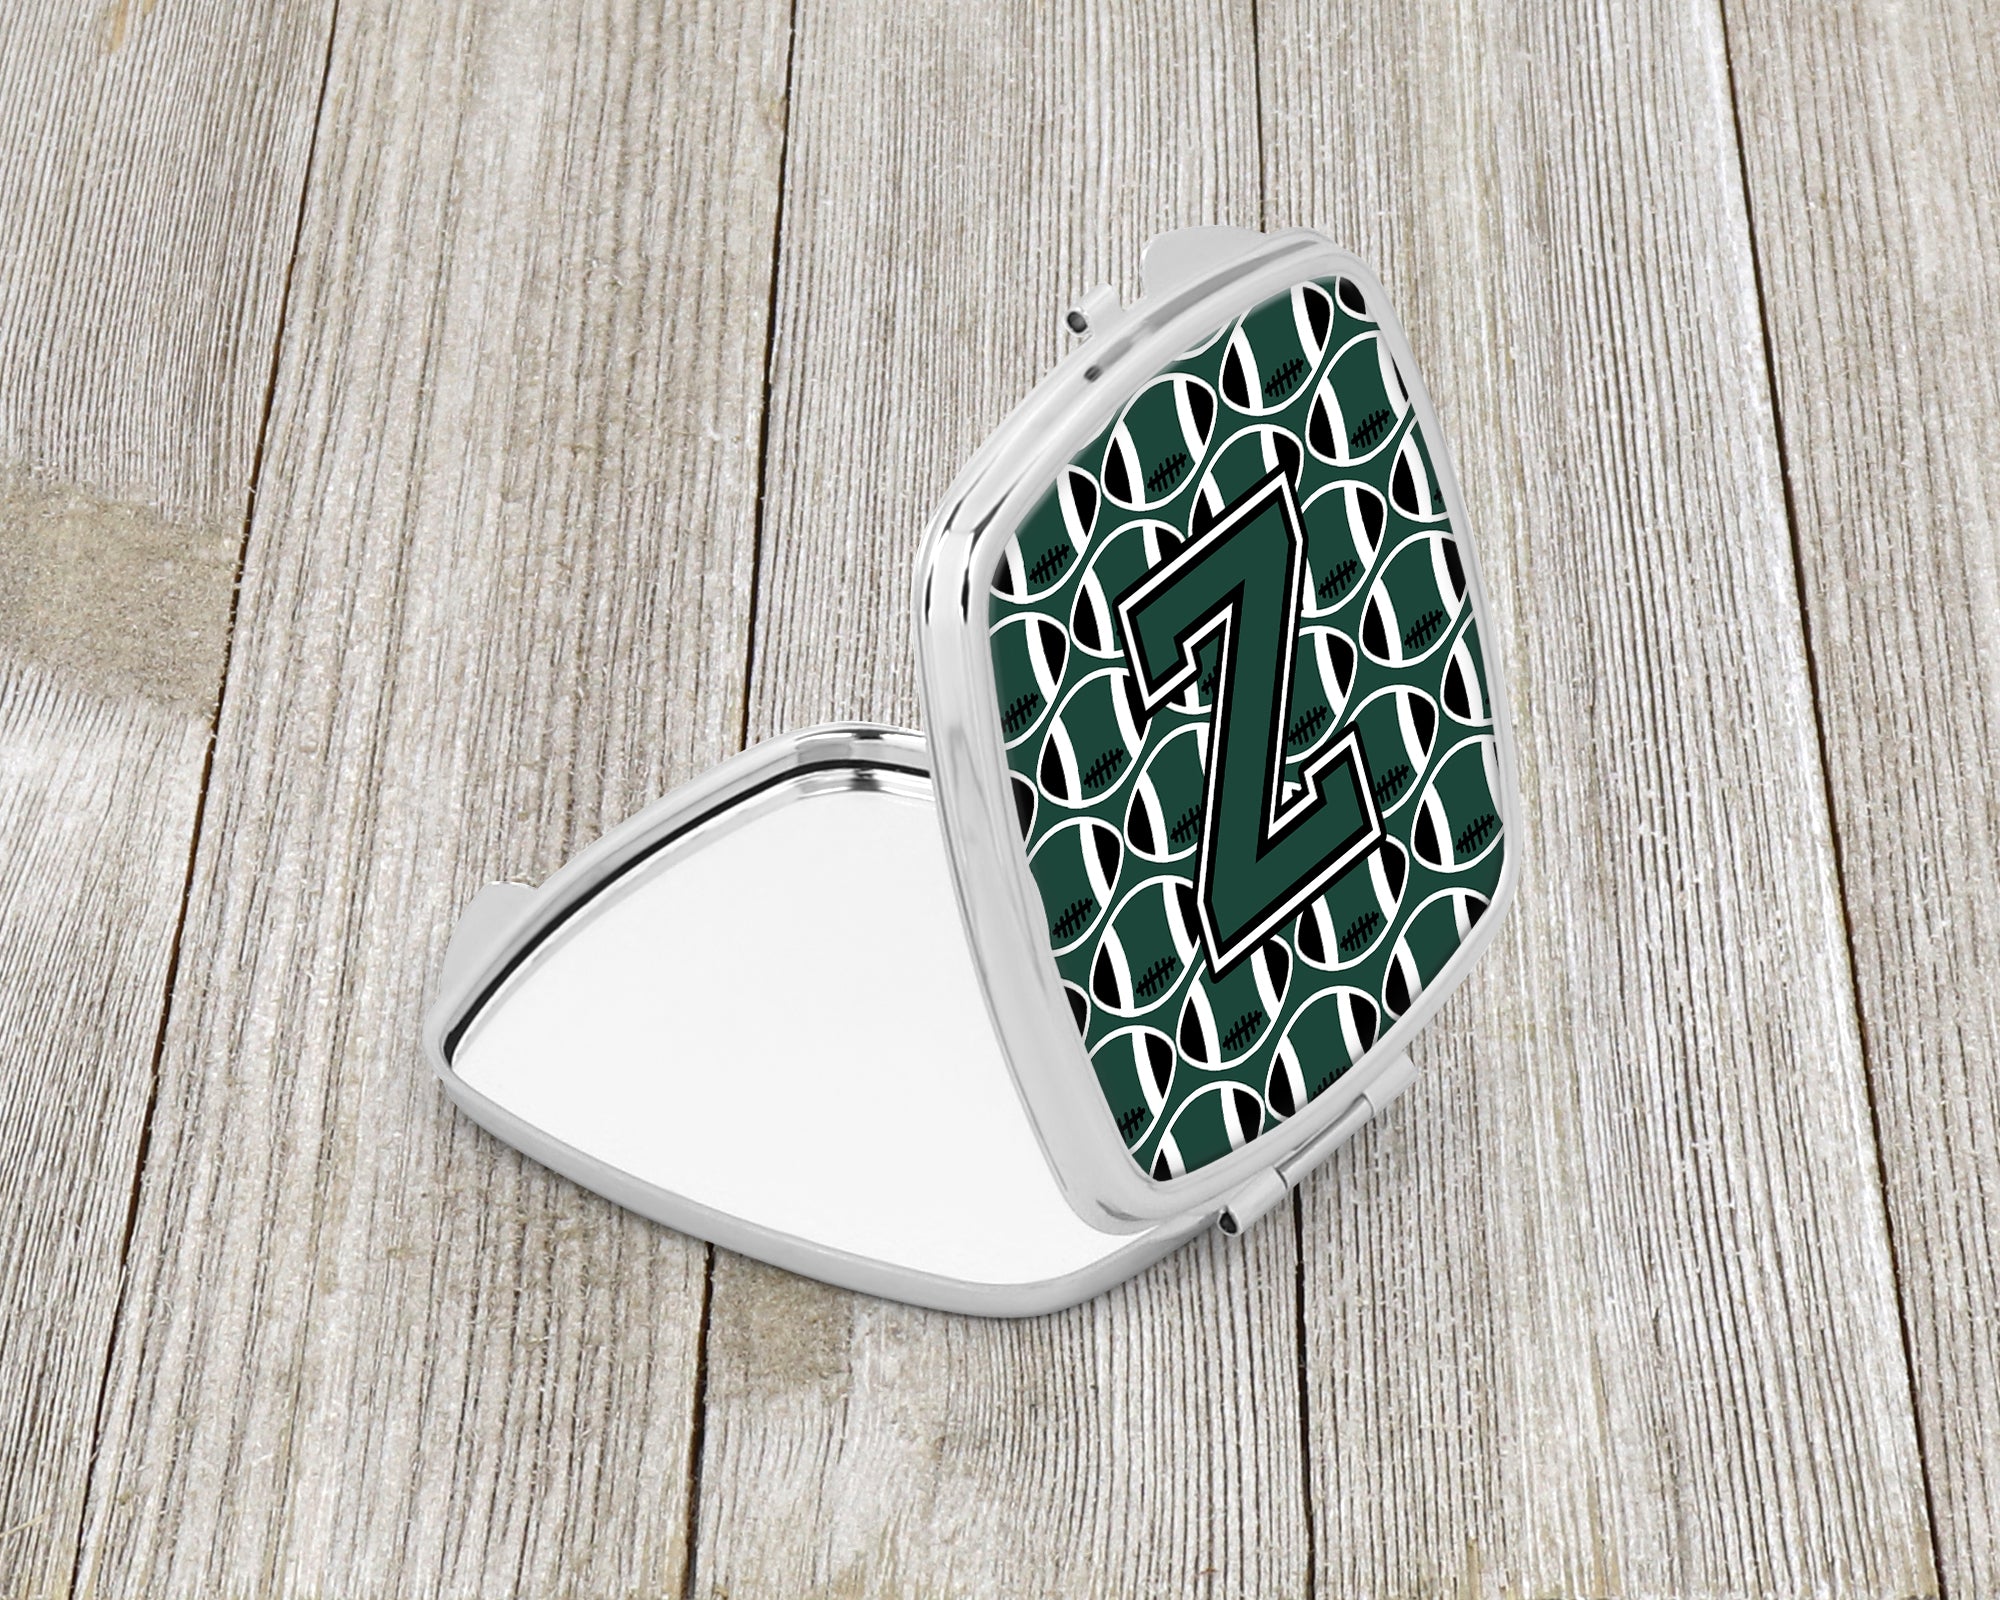 Letter Z Football Green and White Compact Mirror CJ1071-ZSCM  the-store.com.